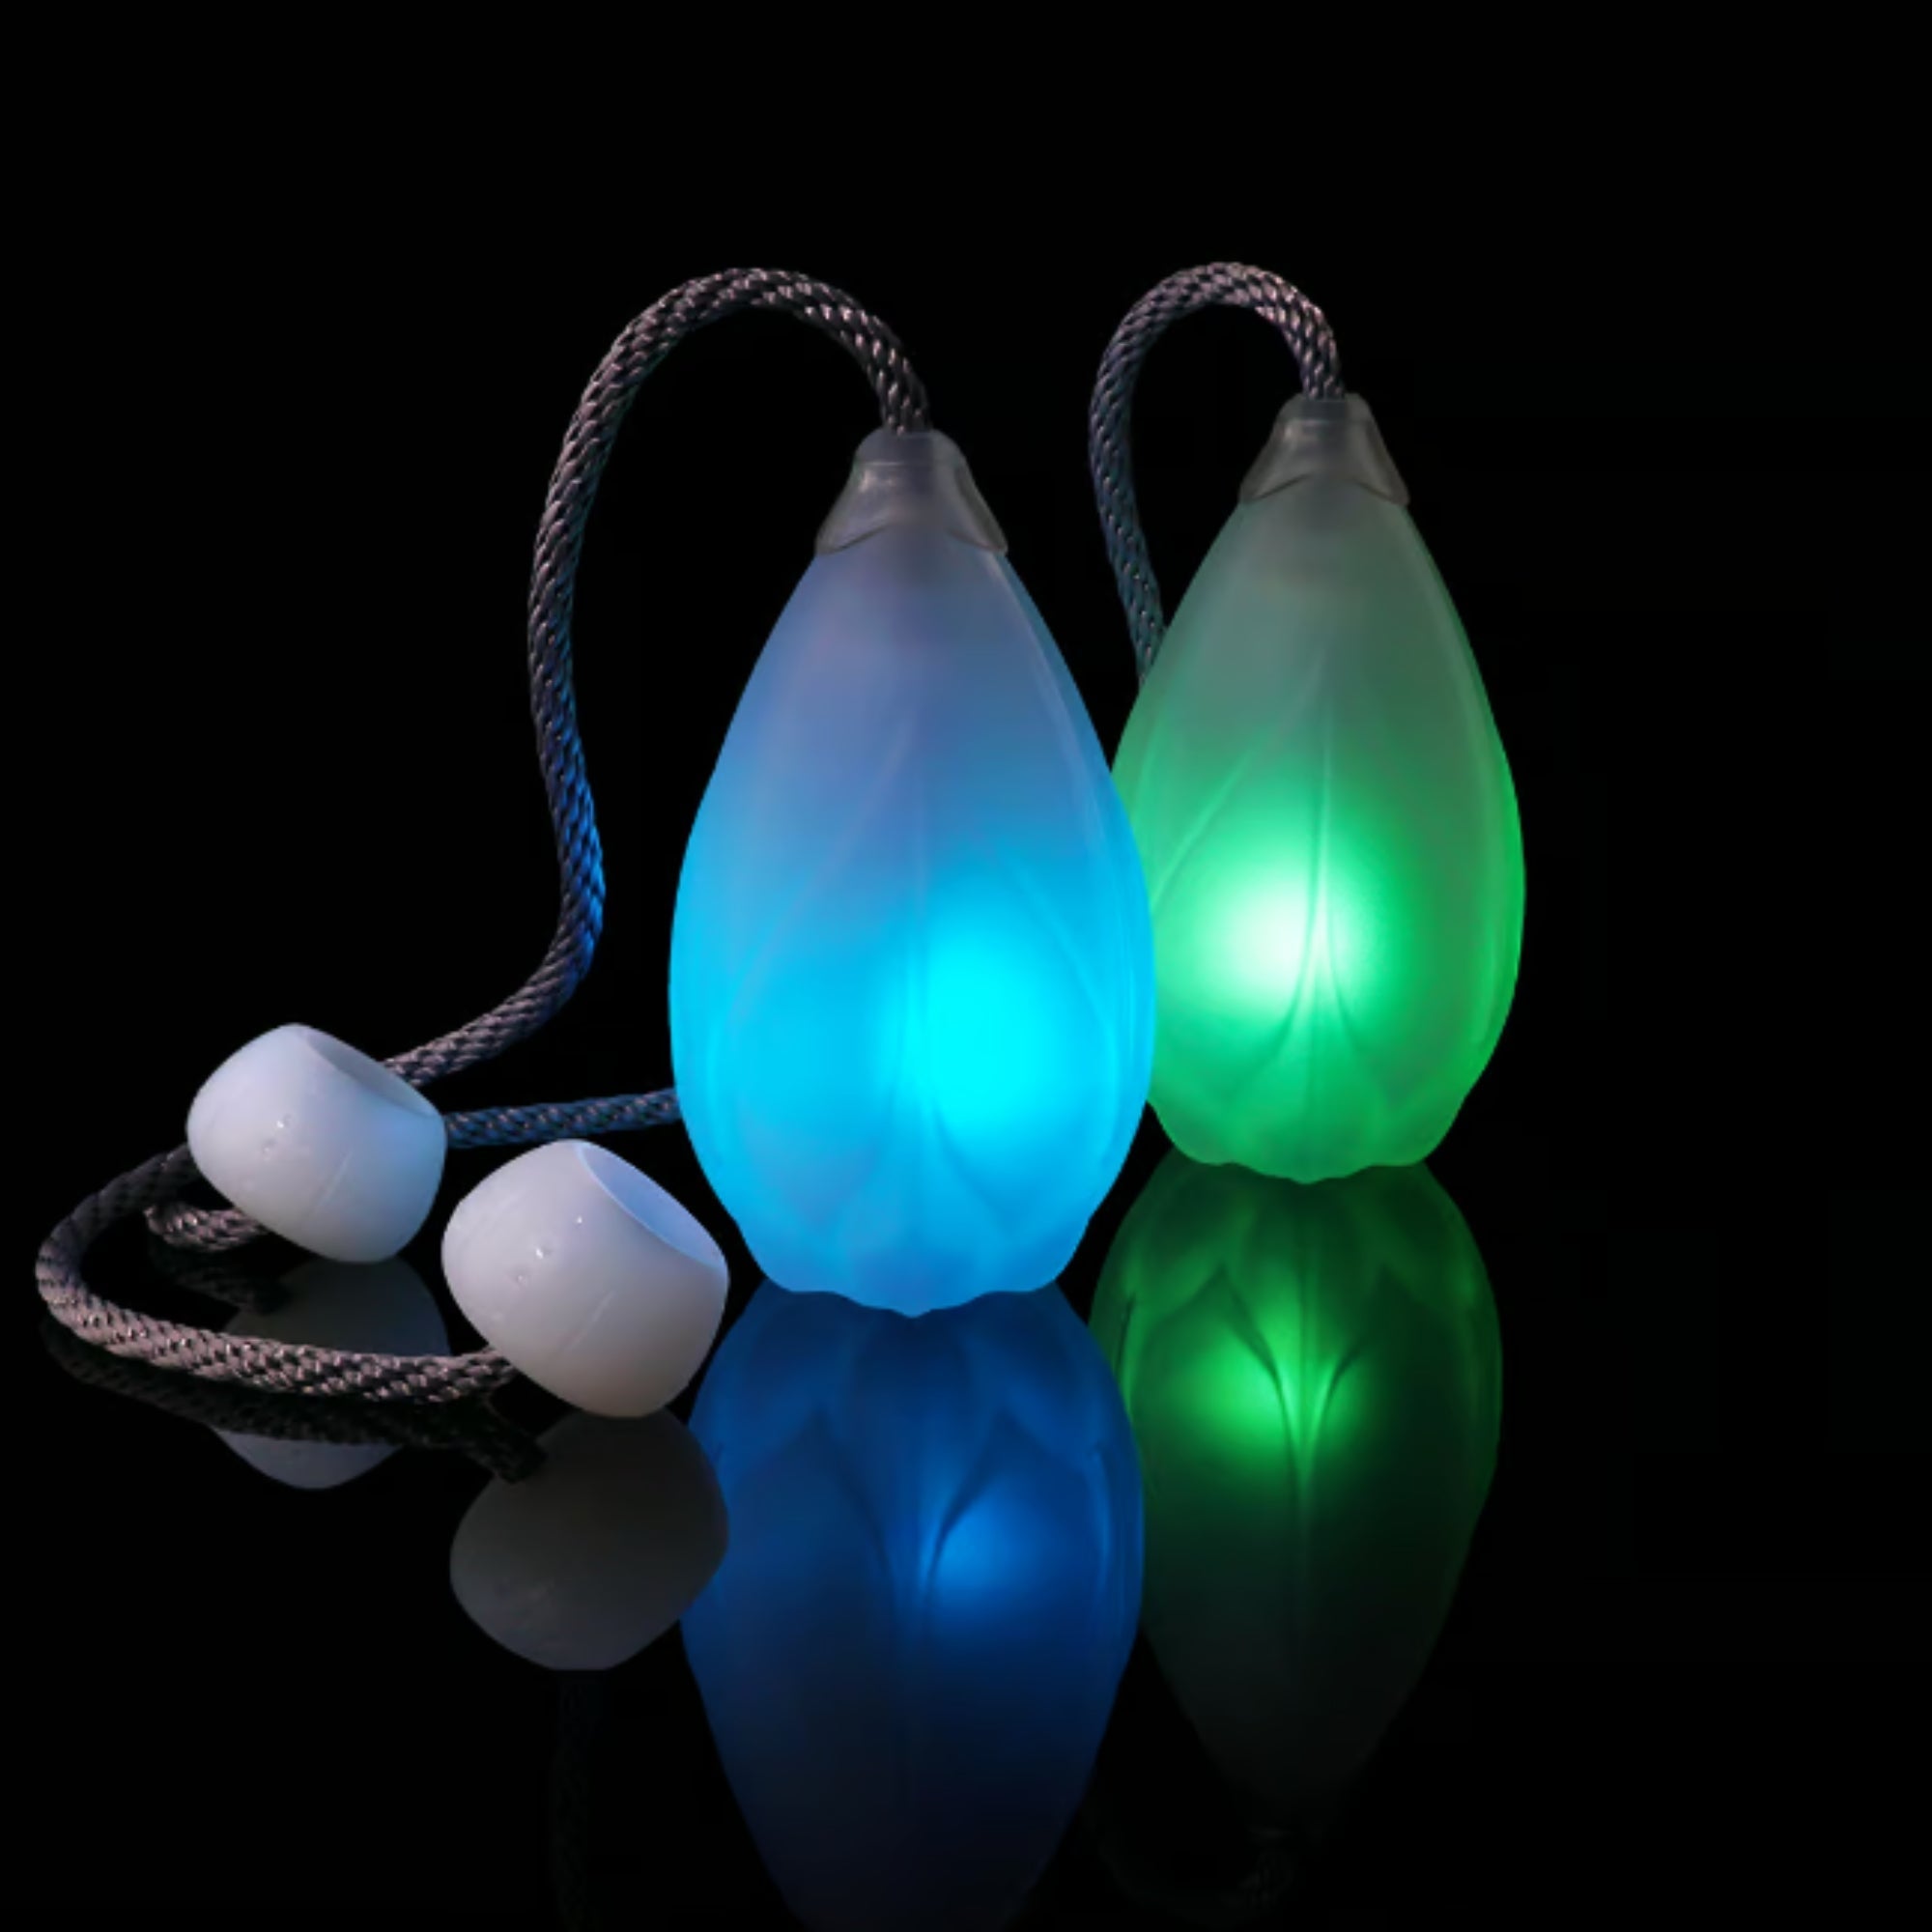 Flowtoys Podpoi v2 glowing, 1 is green 1 is blue